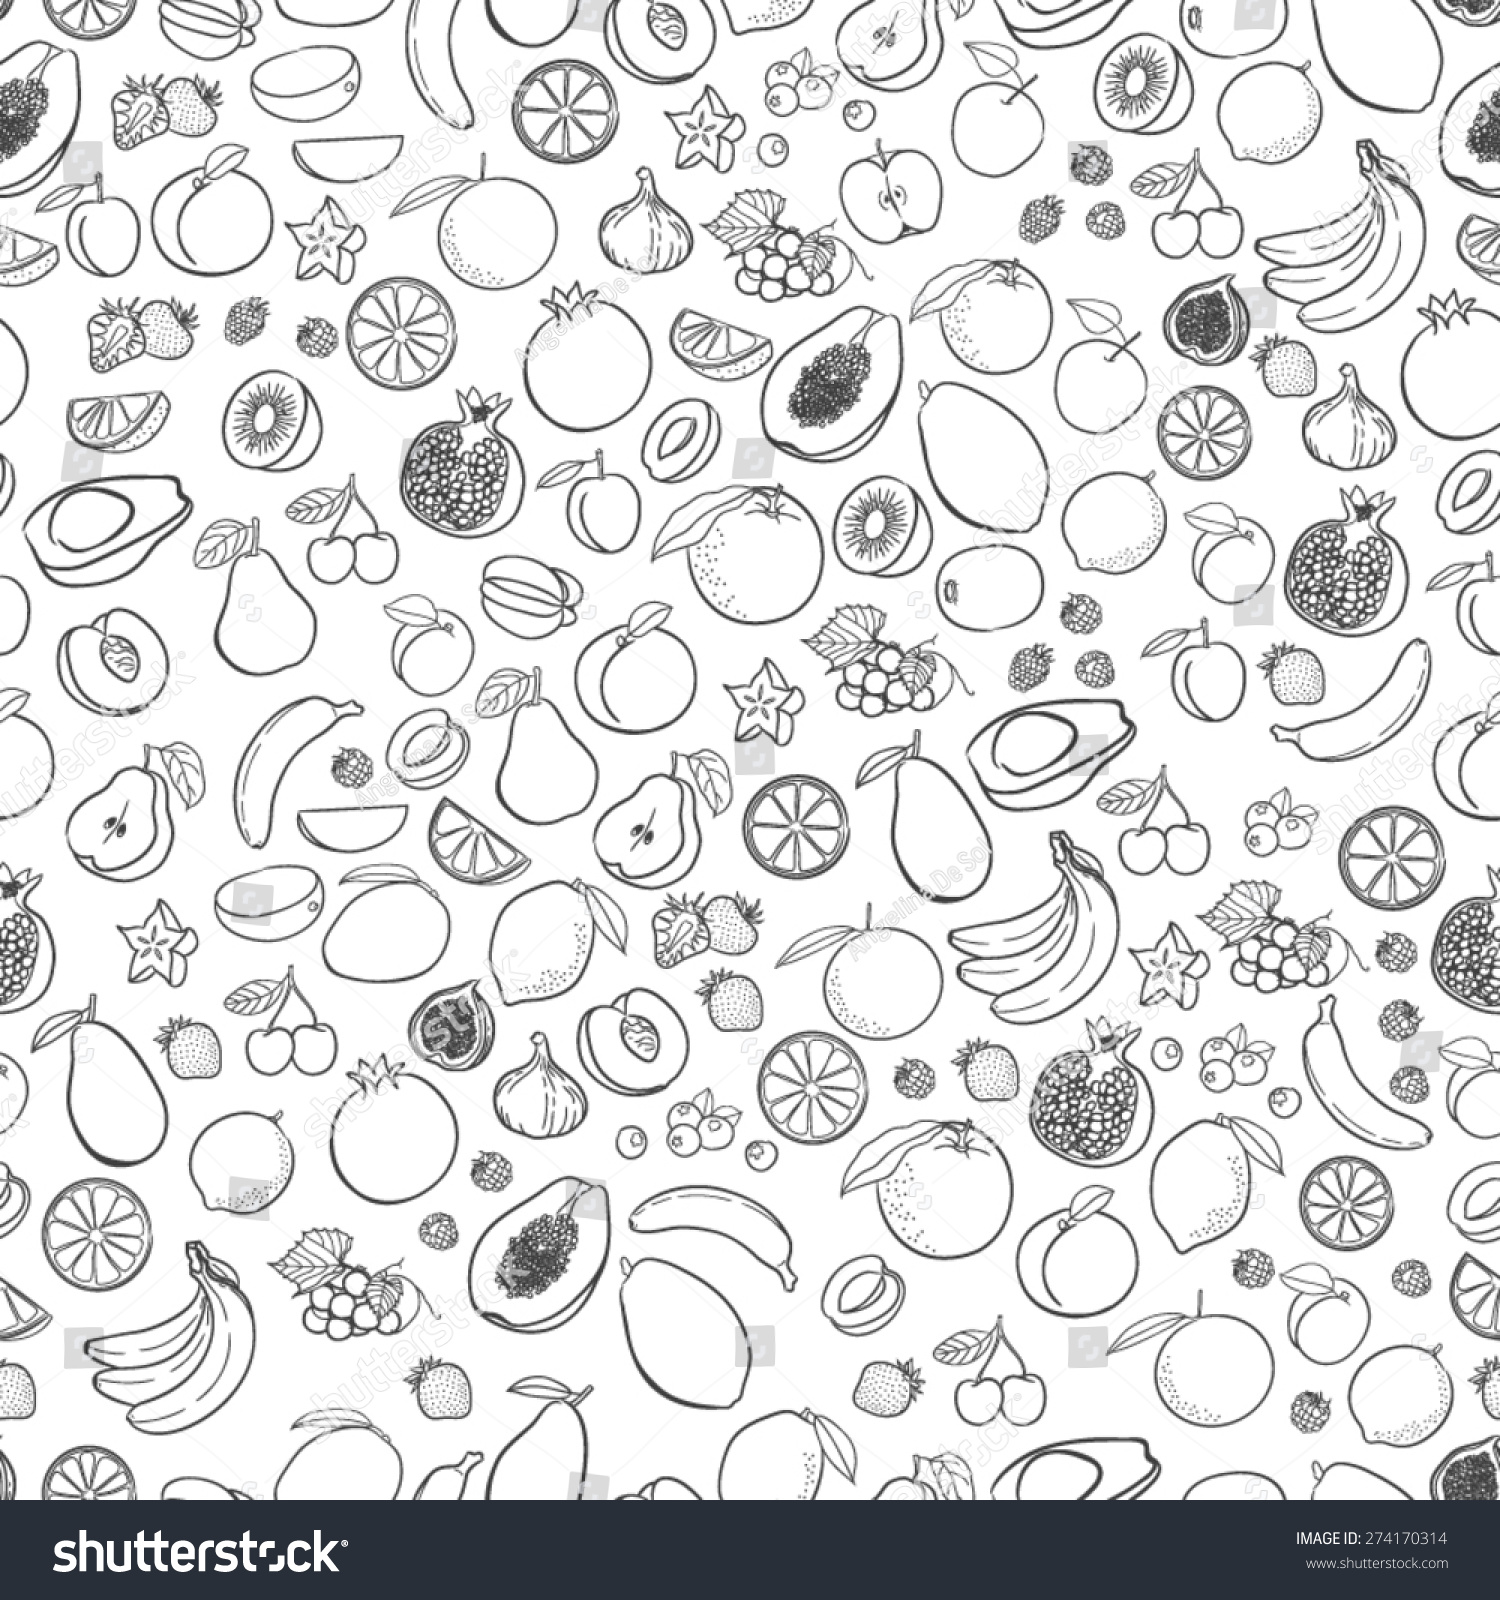 Vector fruits pattern. Fruits seamless background #274170314